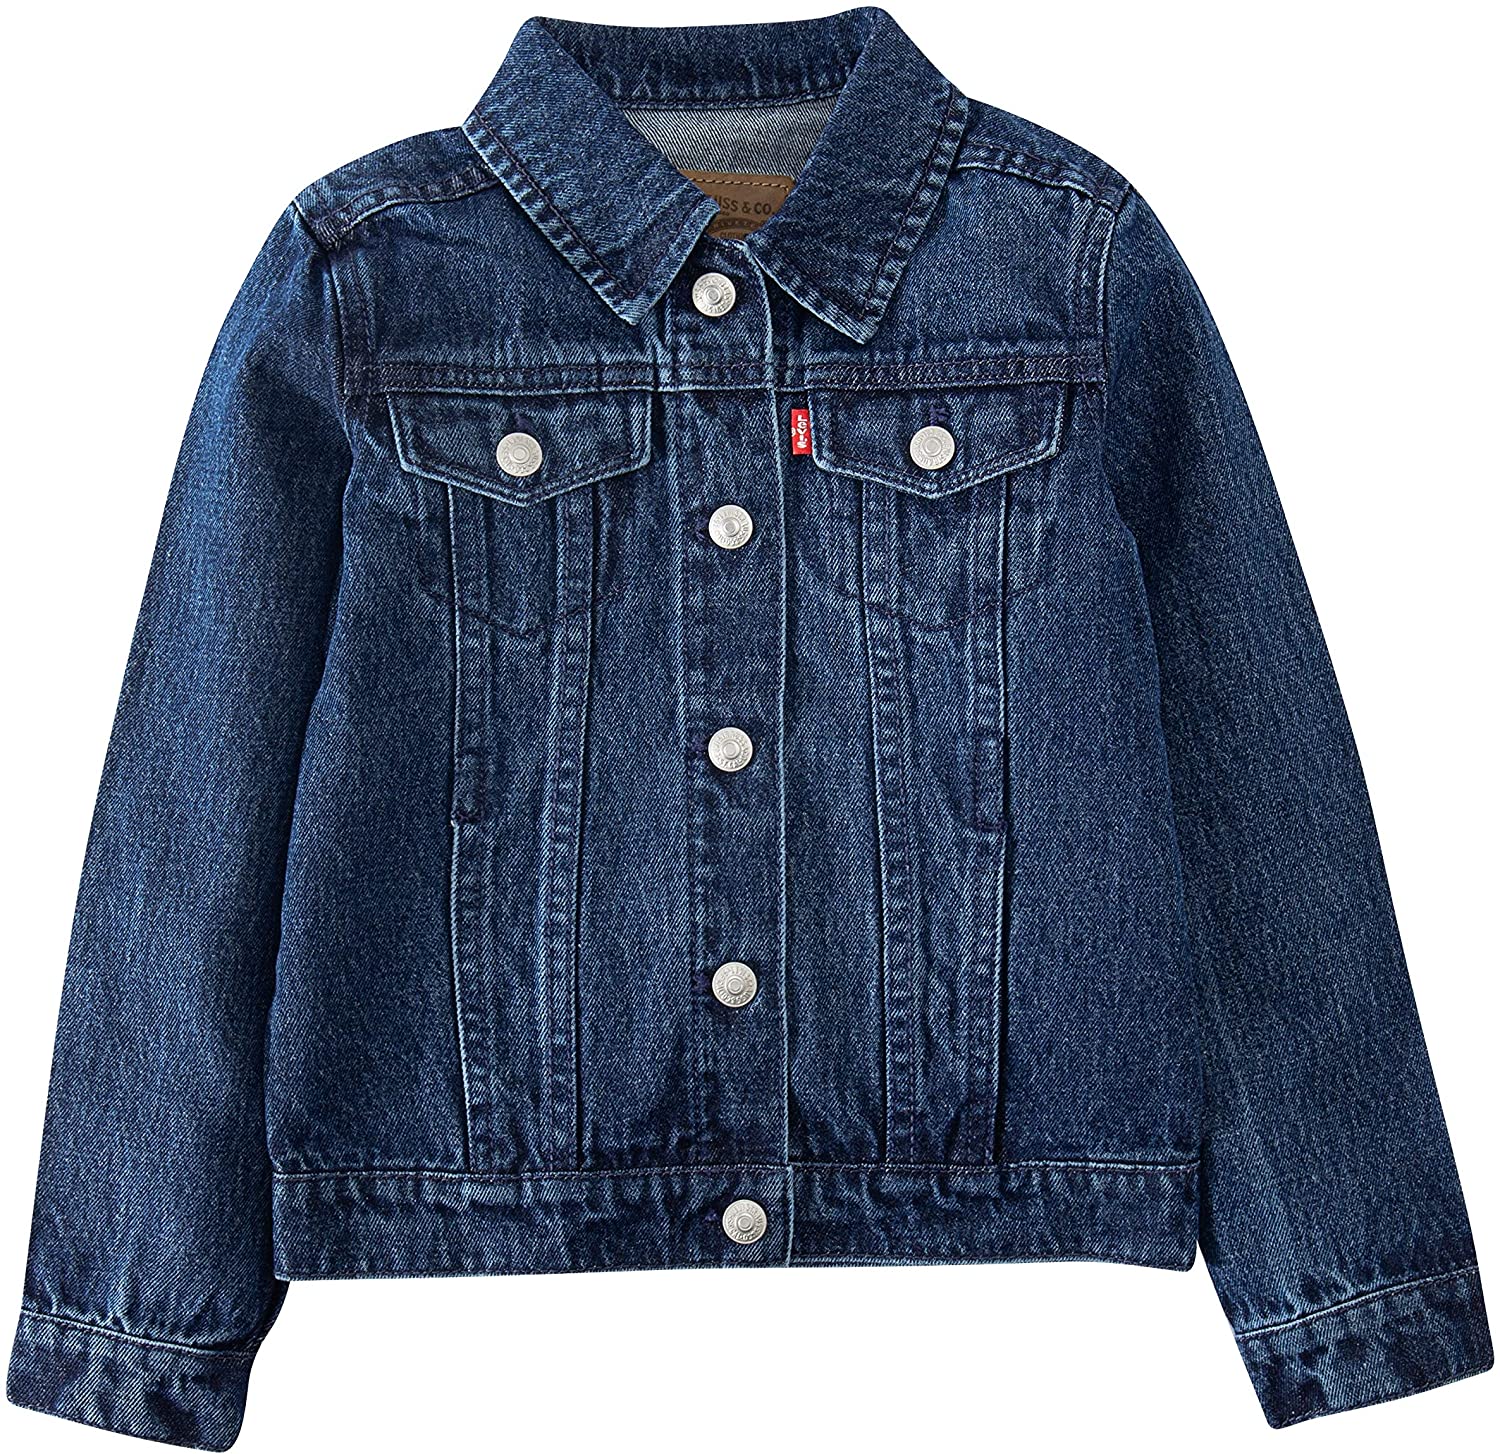 The 10 Best Levi's Denim Jackets to Wear This Spring | Entertainment ...